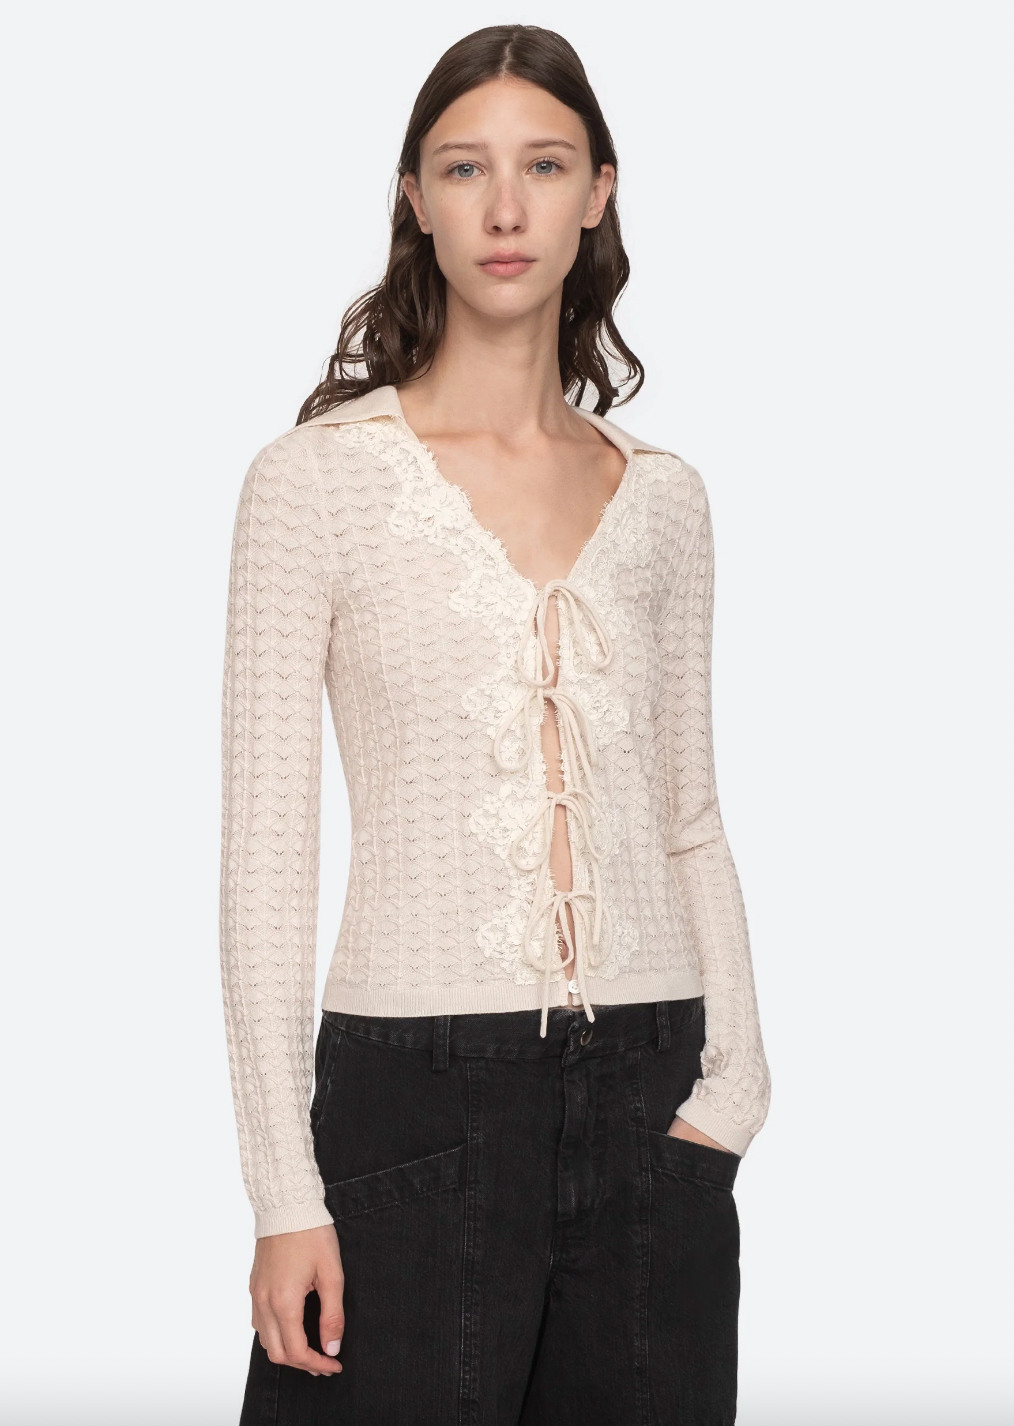 Product Image for Kyra Knit Cardigan, Cream